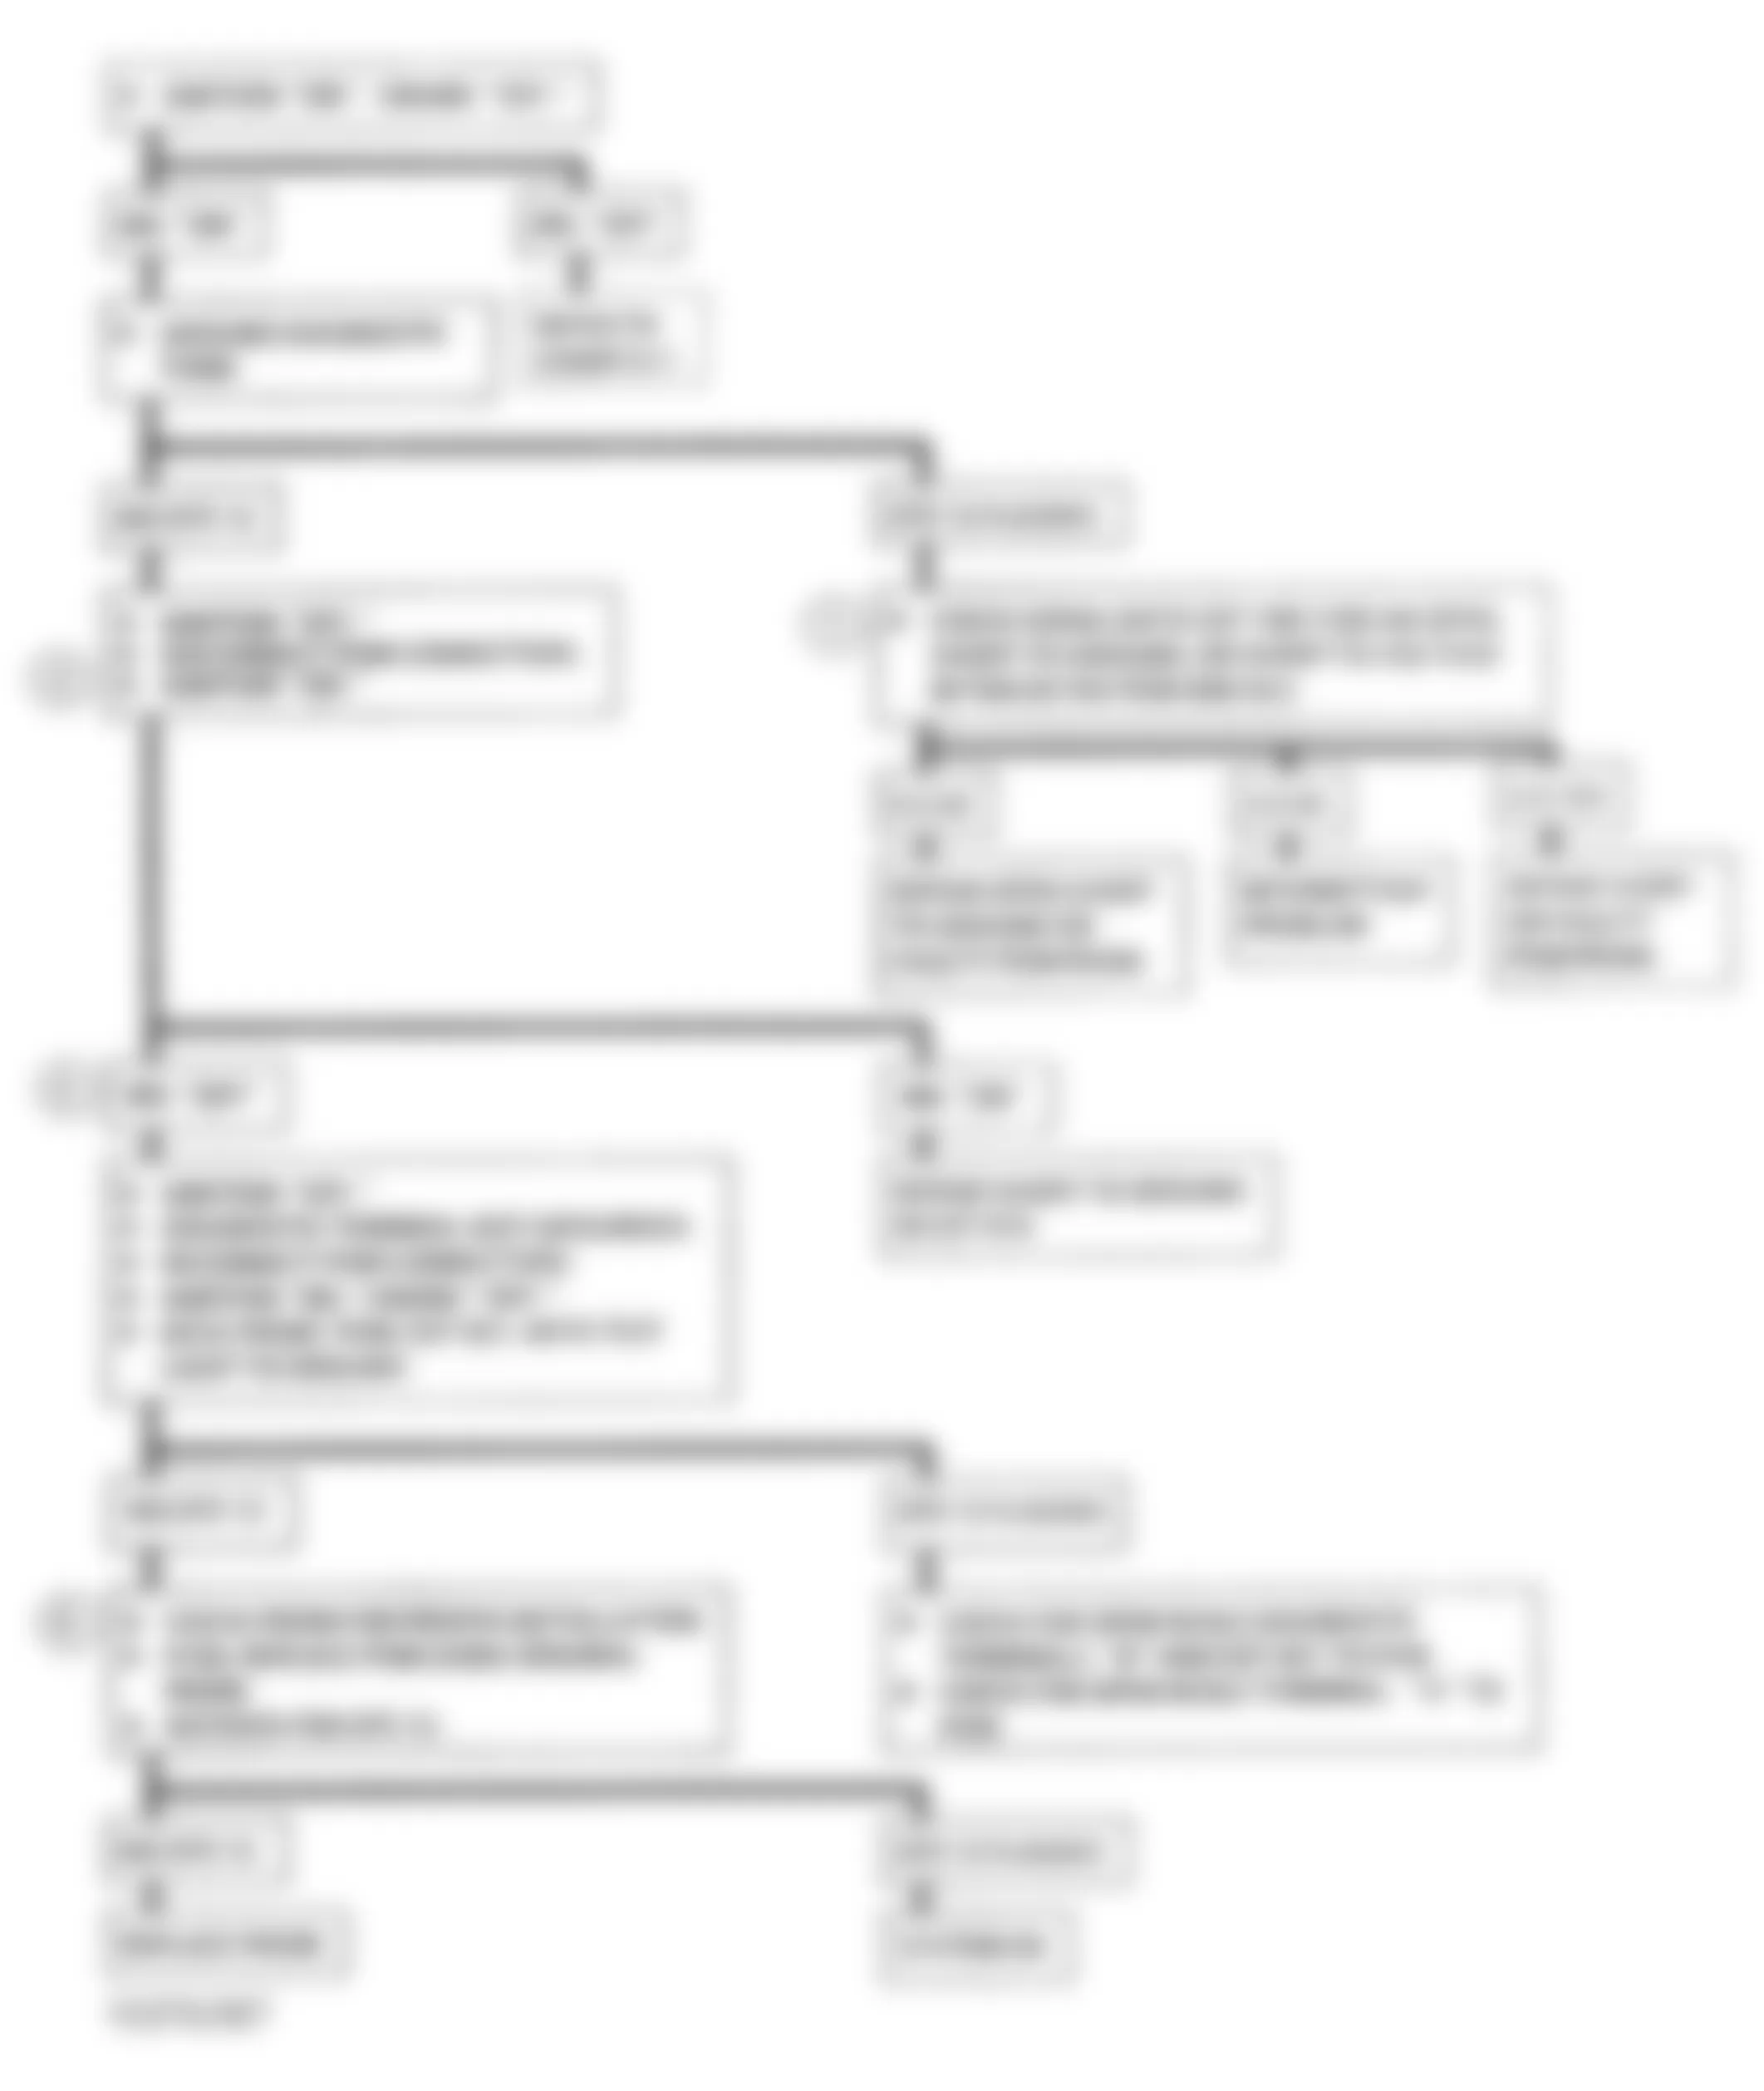 GMC Vandura Special G3500 1993 - Component Locations -  A-2, Flowchart, No DLC Data, MIL On All Time - A/T